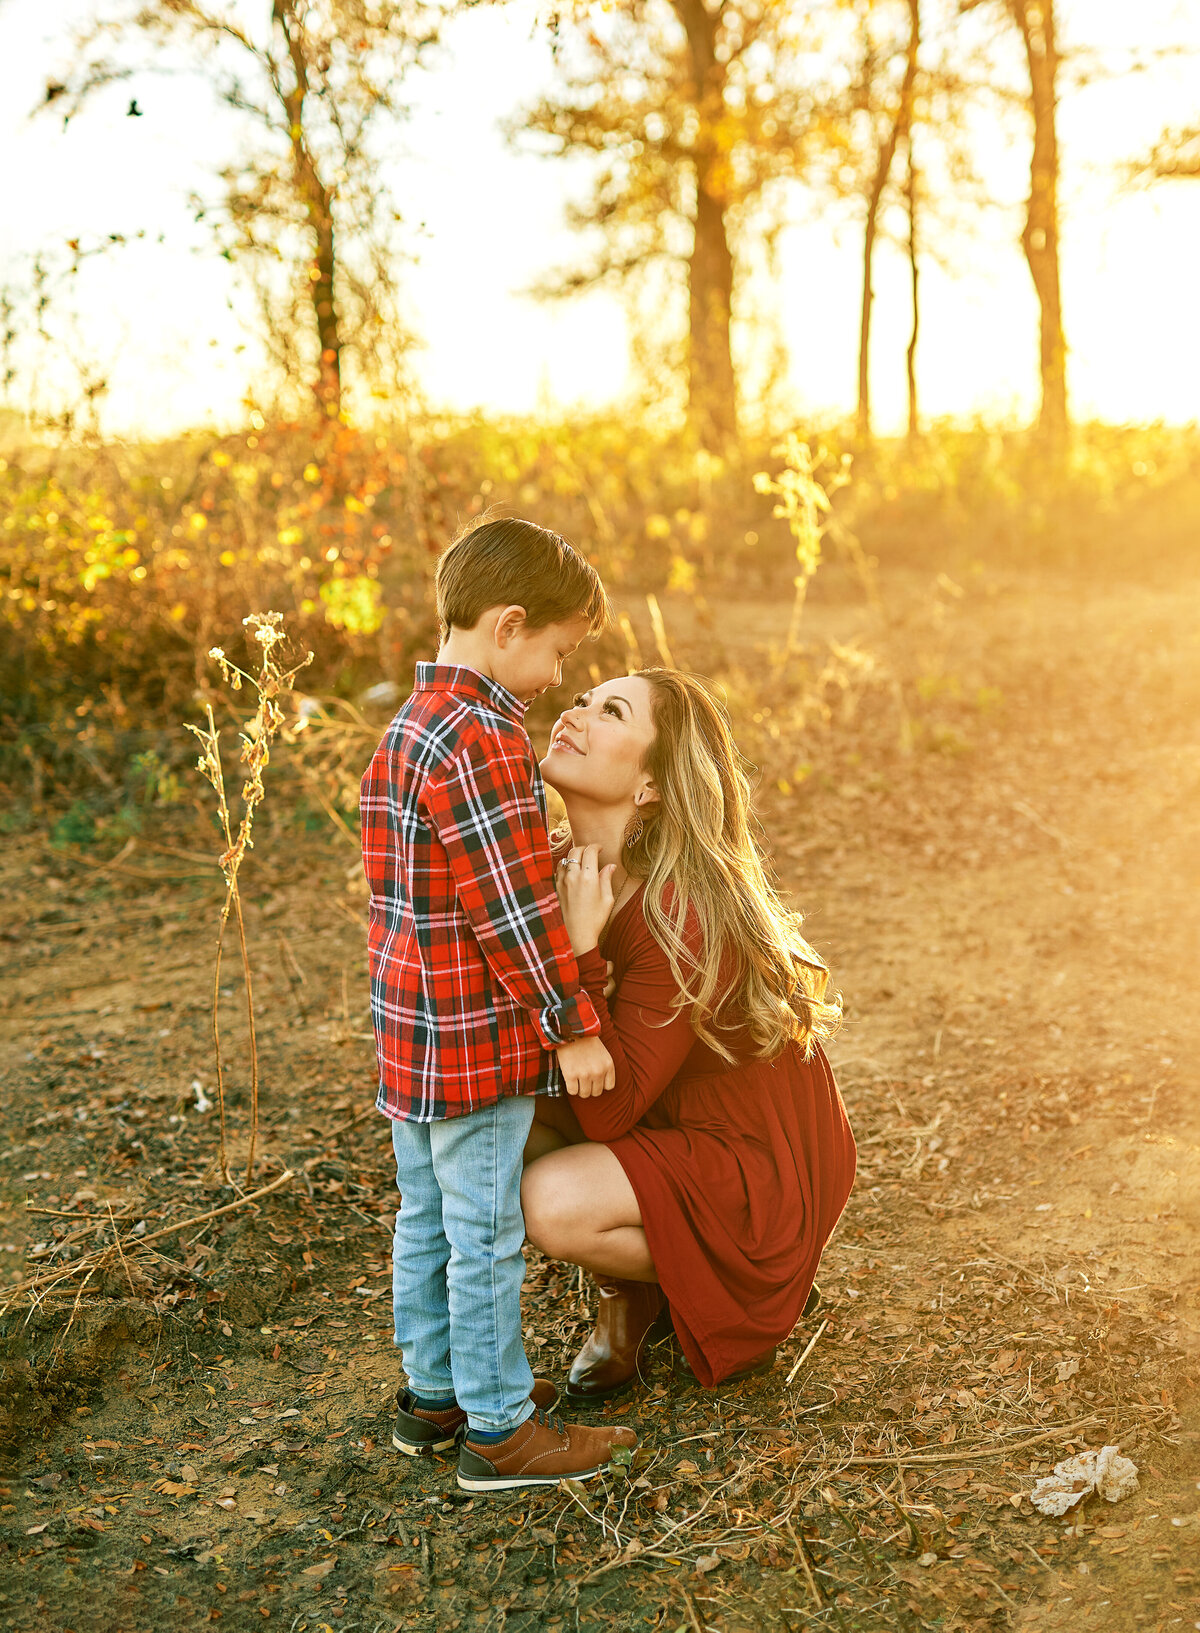 Mom and son photograph at Murrell Park in Grapevine, Texas